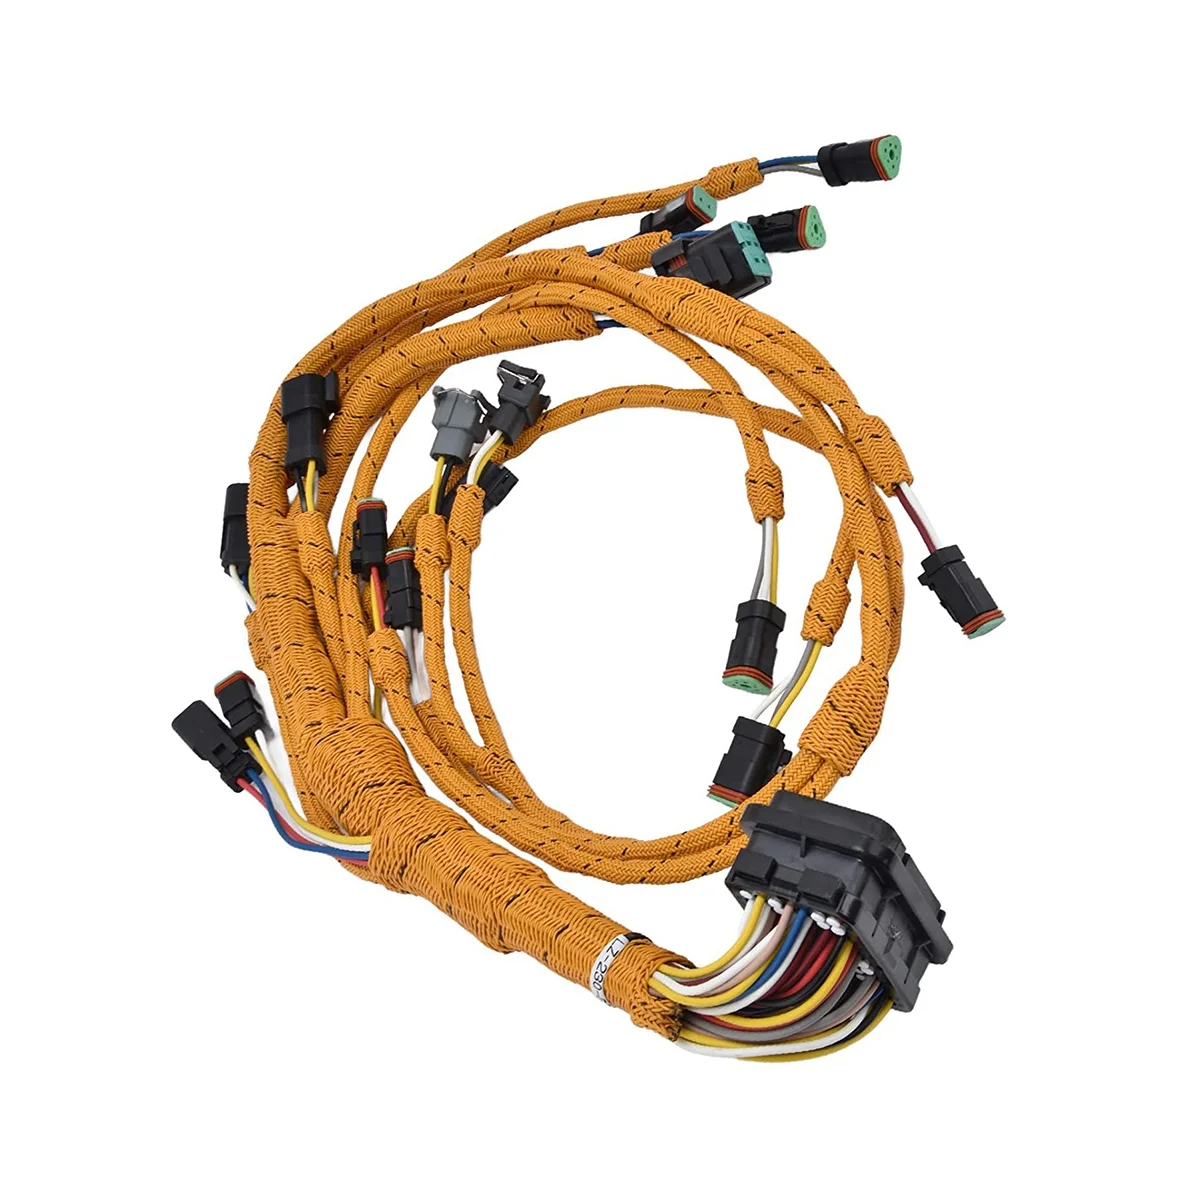 

230-6279 2306279 for CAT Excavator Parts 330C E330C Harness C-9 Engine Wiring Harness